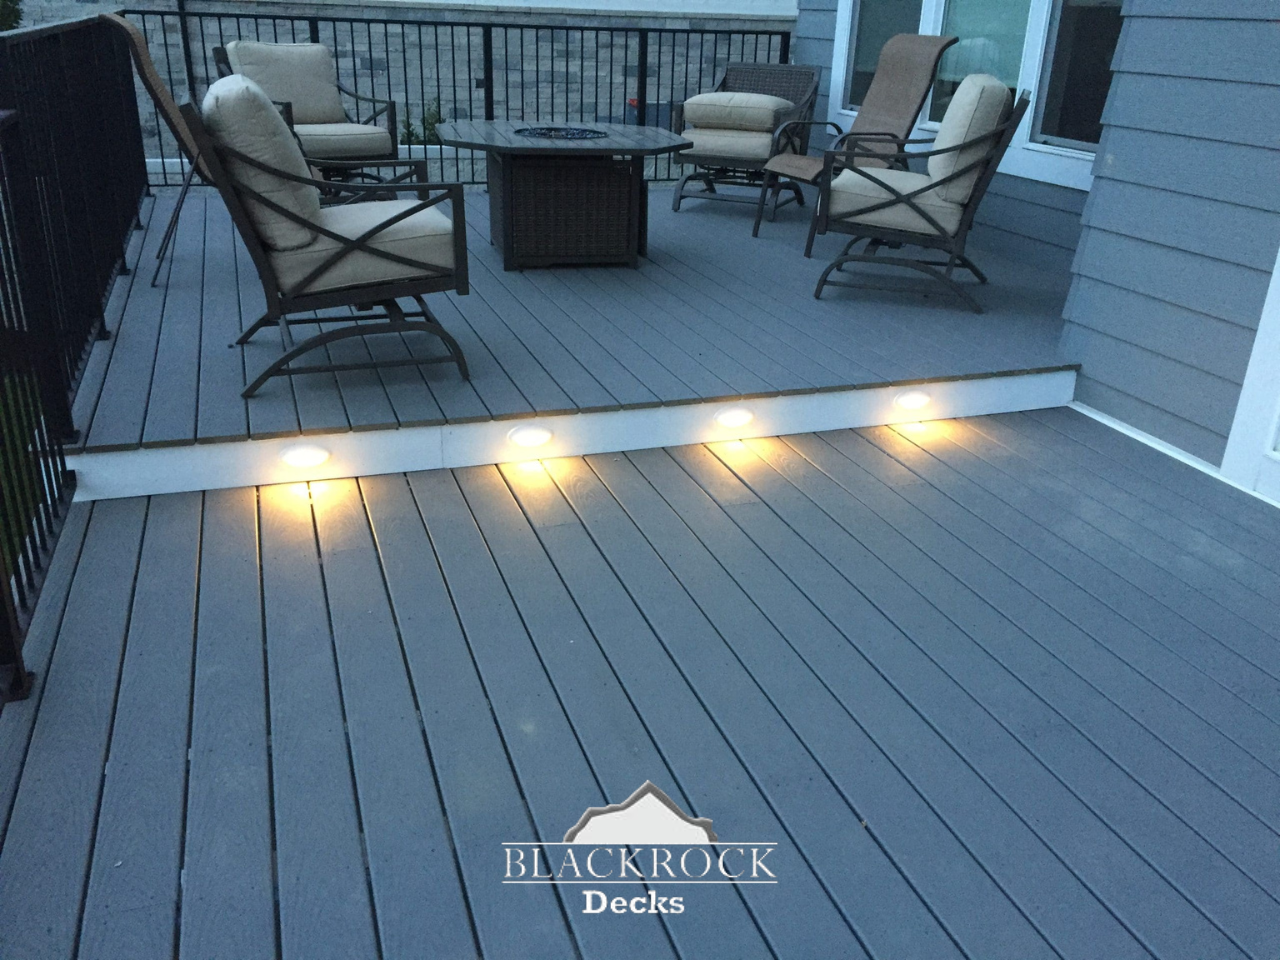 Blackrock Decks has provided high-quality custom decks in Saratoga Springs, Utah for 40+ years. Contact us today for a quote.